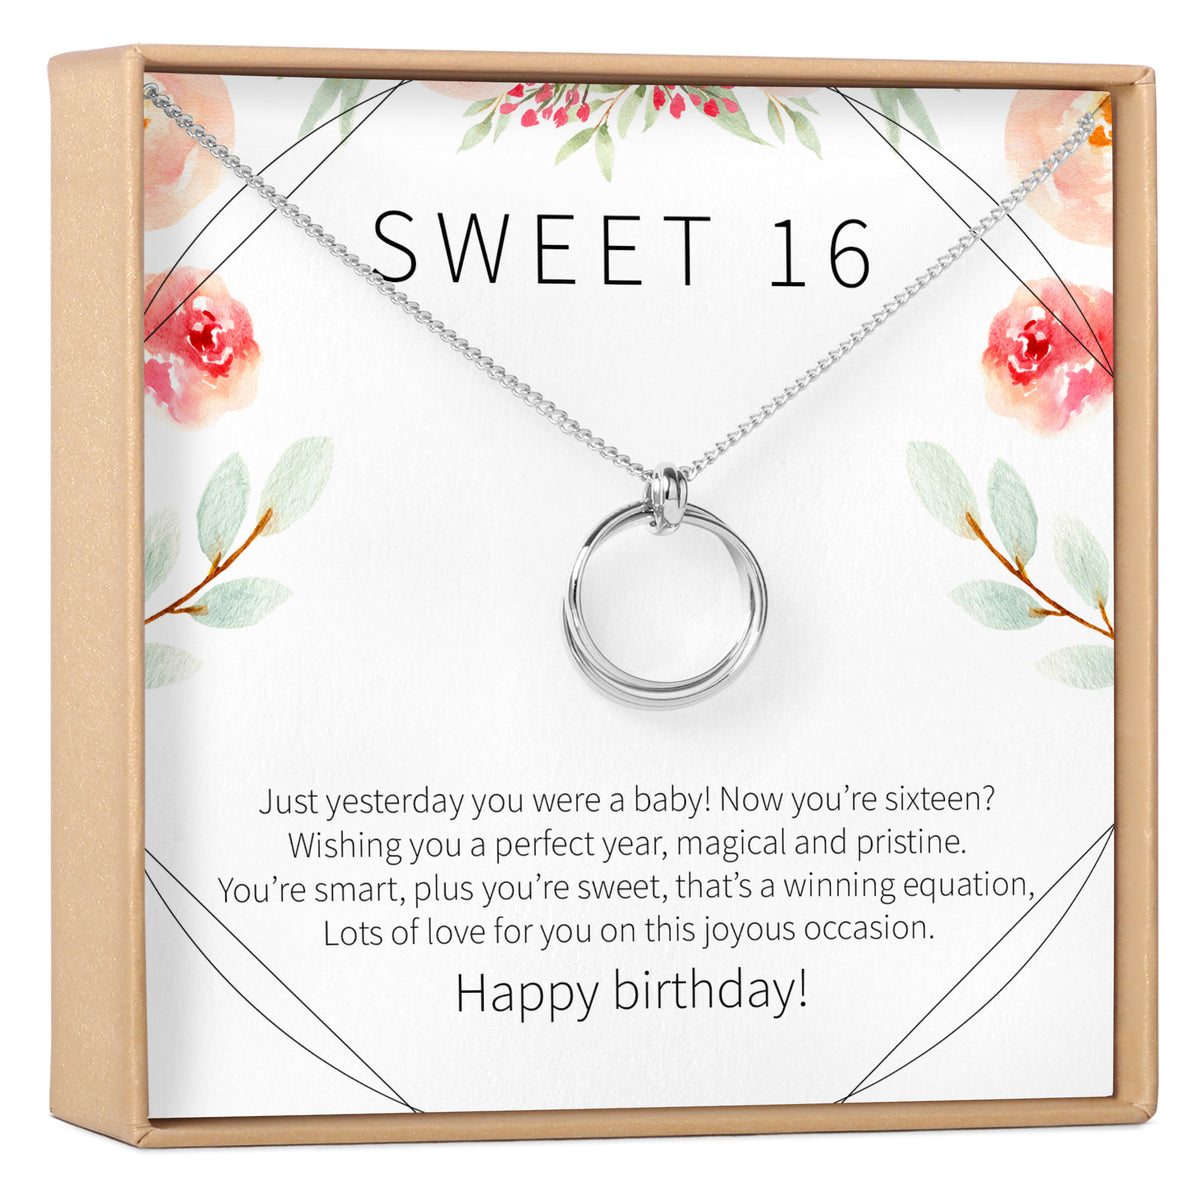 Sweet 16 Necklace, Multiple Styles